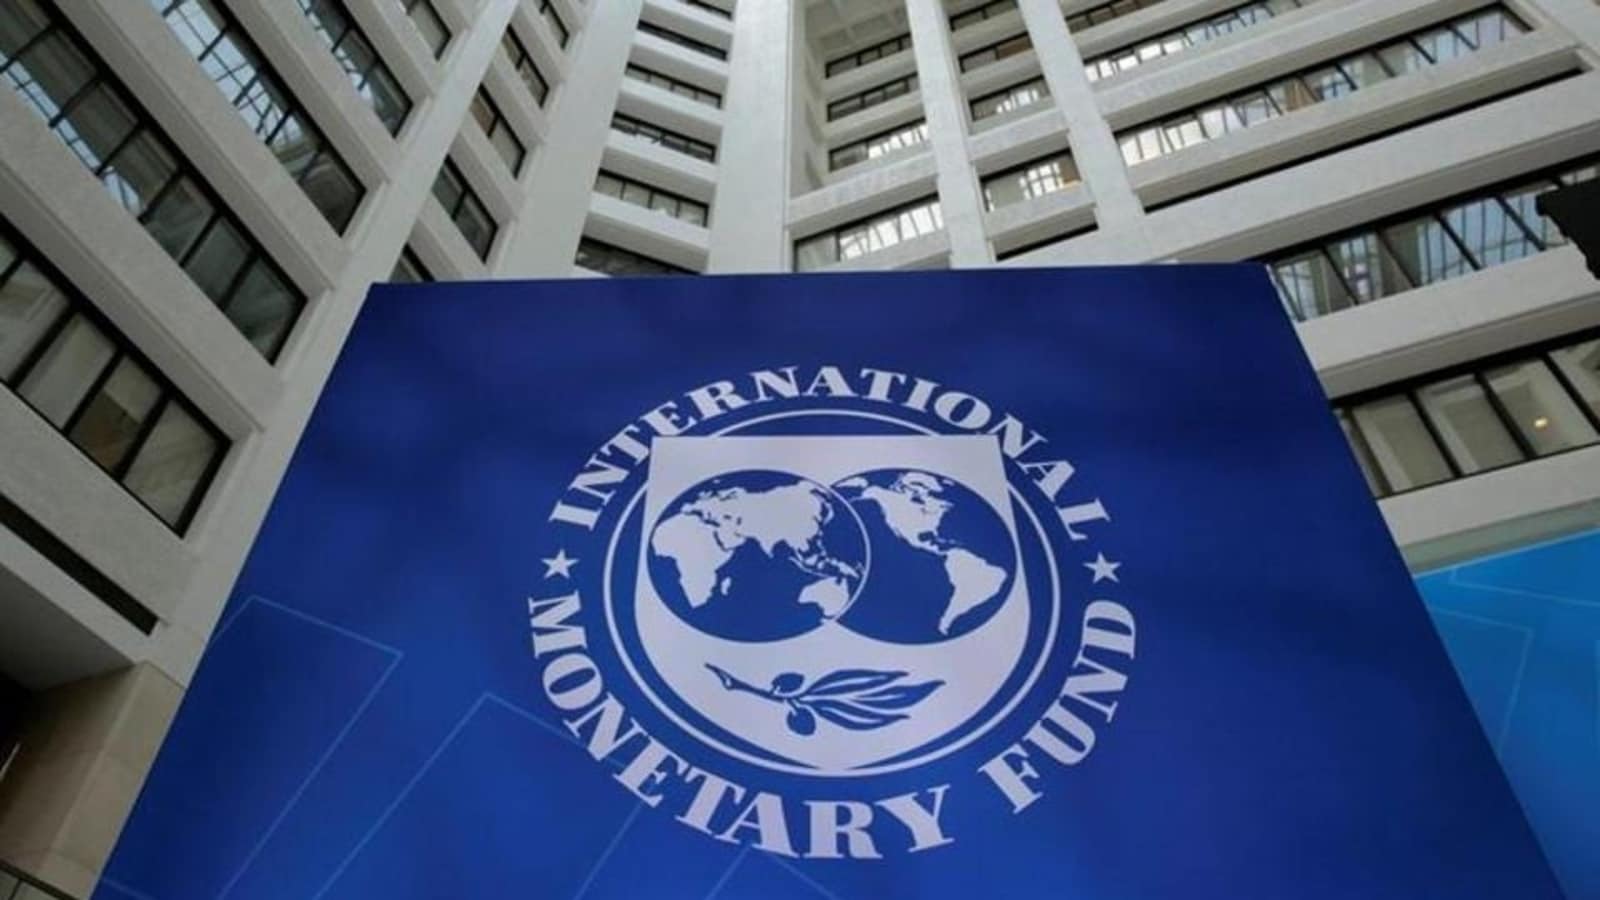 India’s high growth rate ‘positive news’ for world: IMF